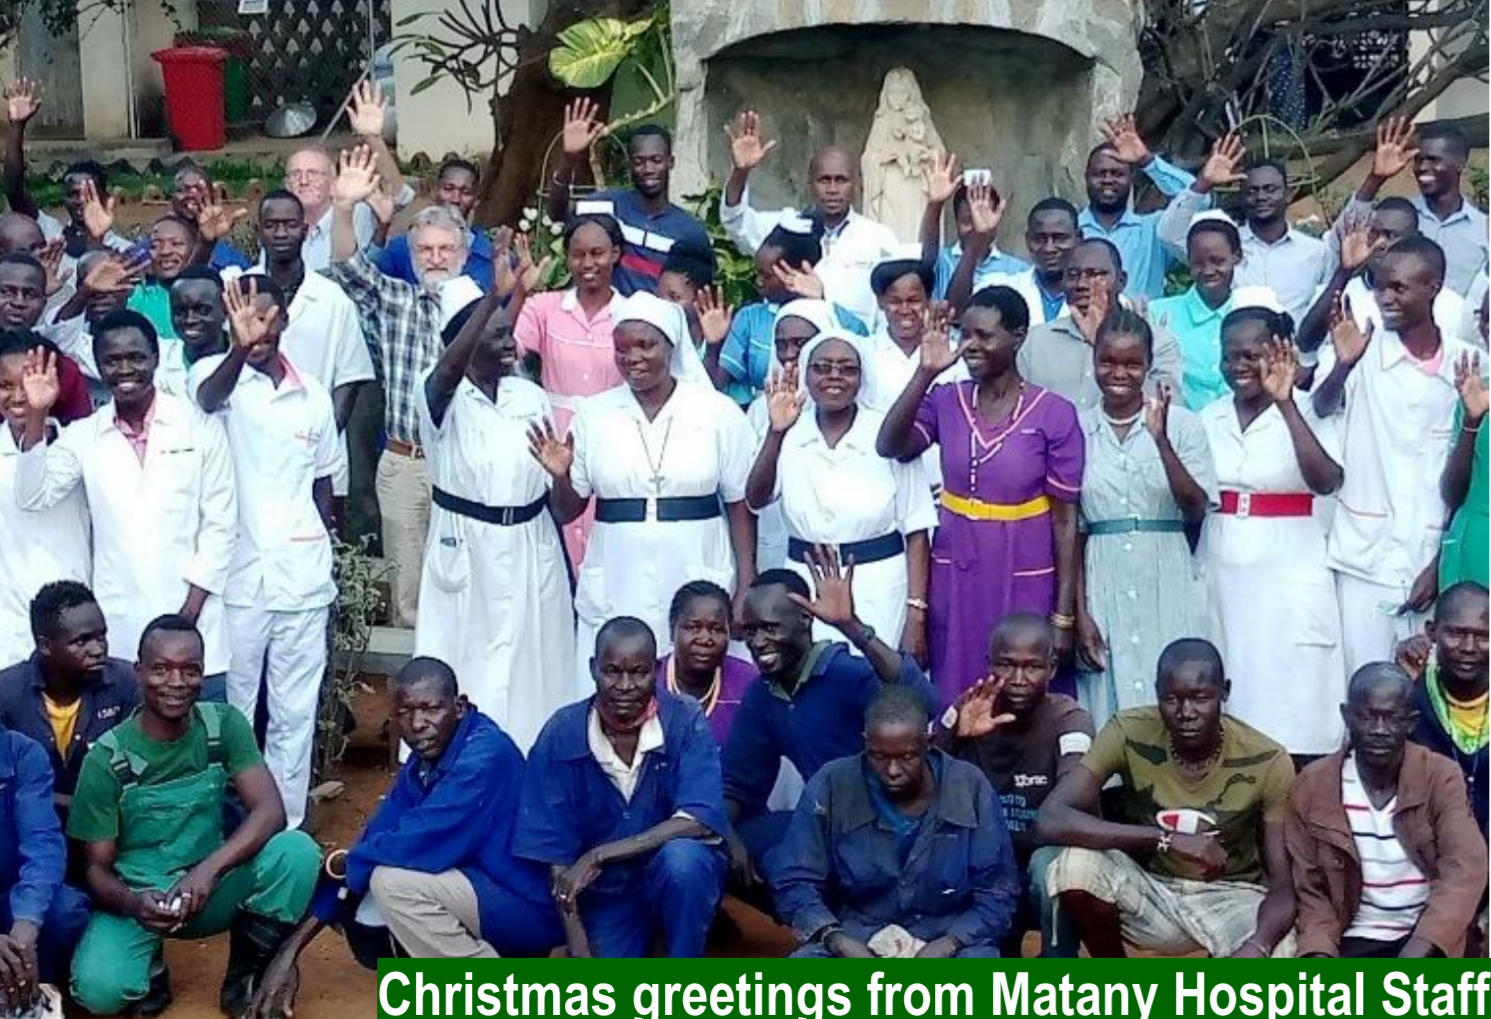 the staff of St Kizito Hospital in Matany stand outside the hospital